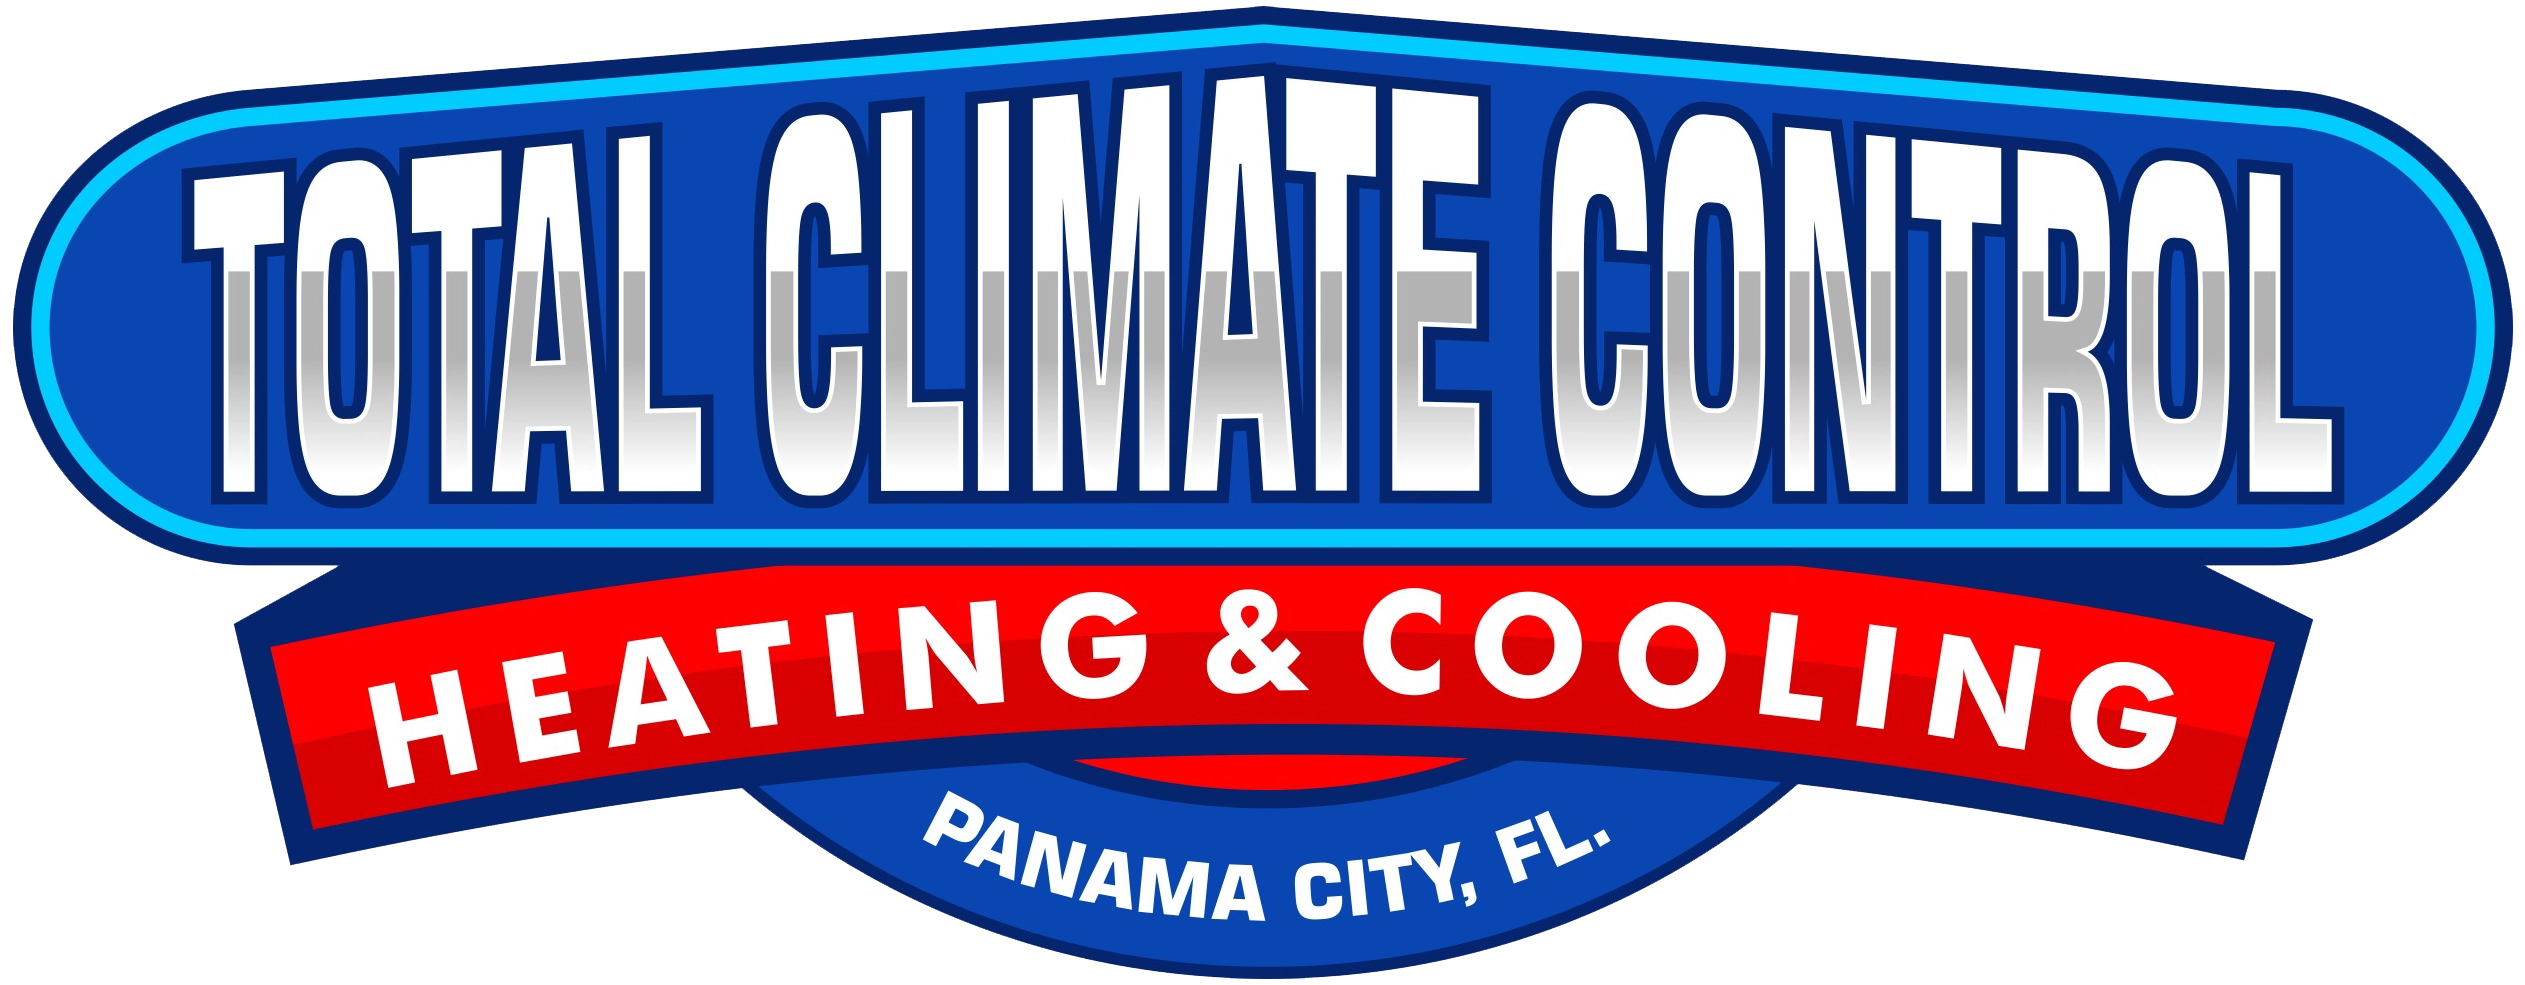 Total Climate Control Logo